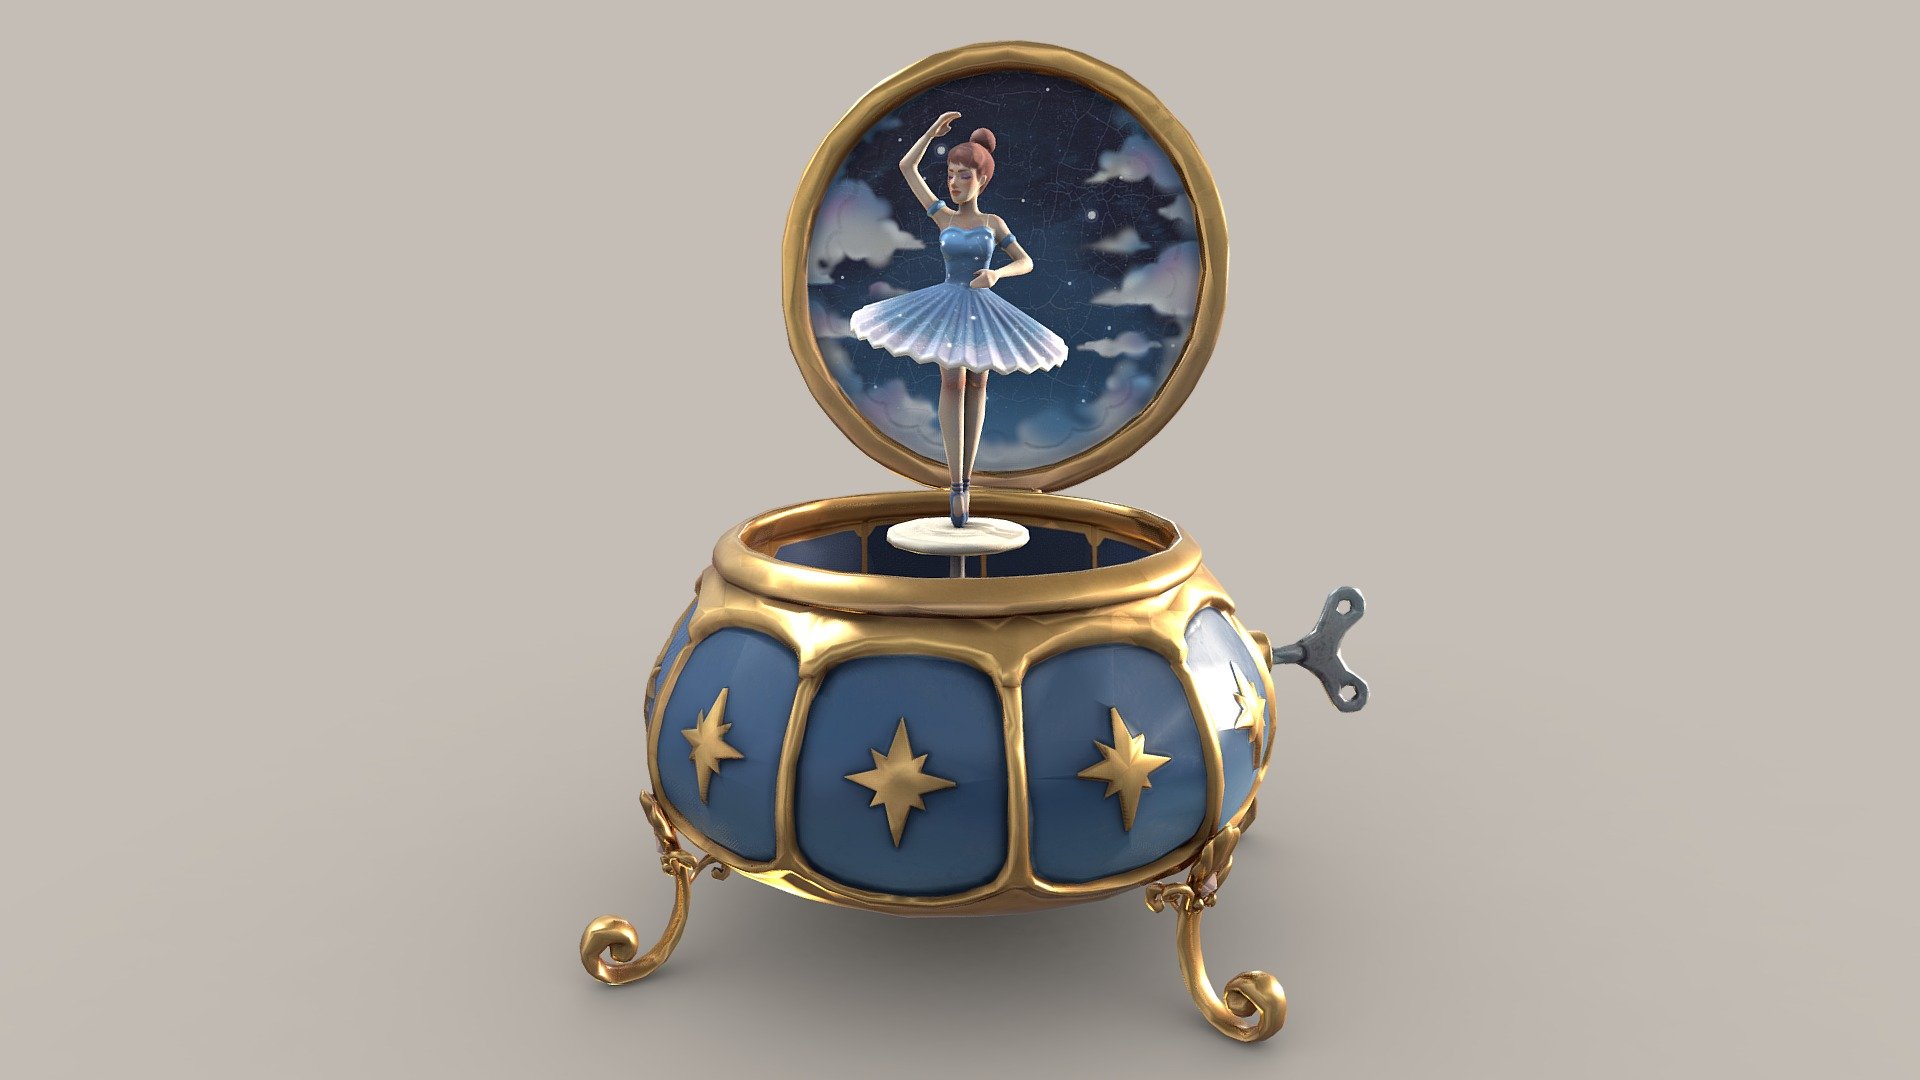 I modeled an ornate music box using ZBrush and textured it with Substance Painter. I took a lot of inspiration from this artwork by Nynne 3d model